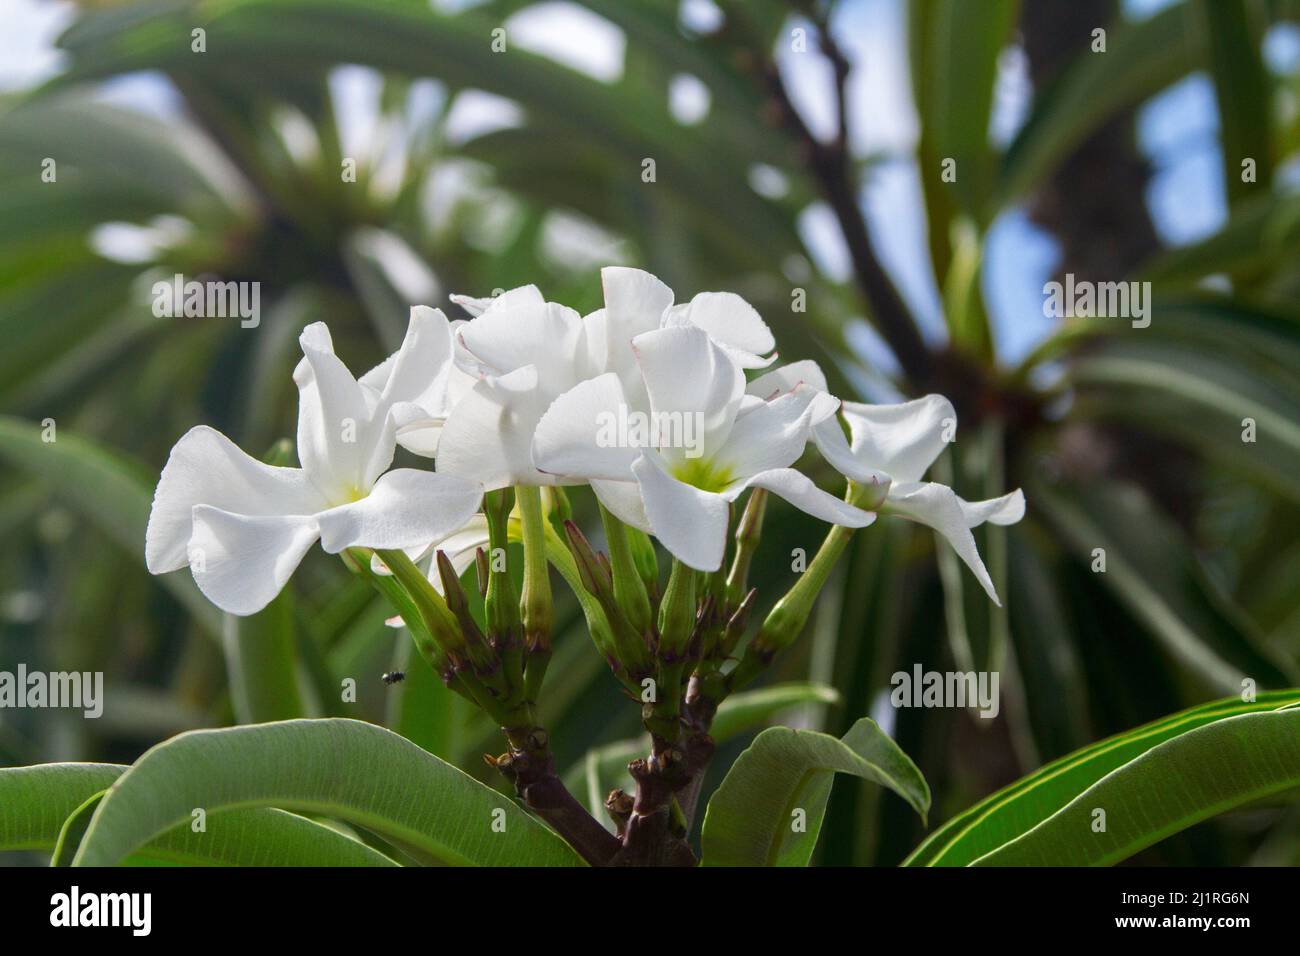 Cluster of large white flowers of Pachypodium lamerei, Madagascar palm, a drought tolerant succulent plant, against background of green leaves Stock Photo